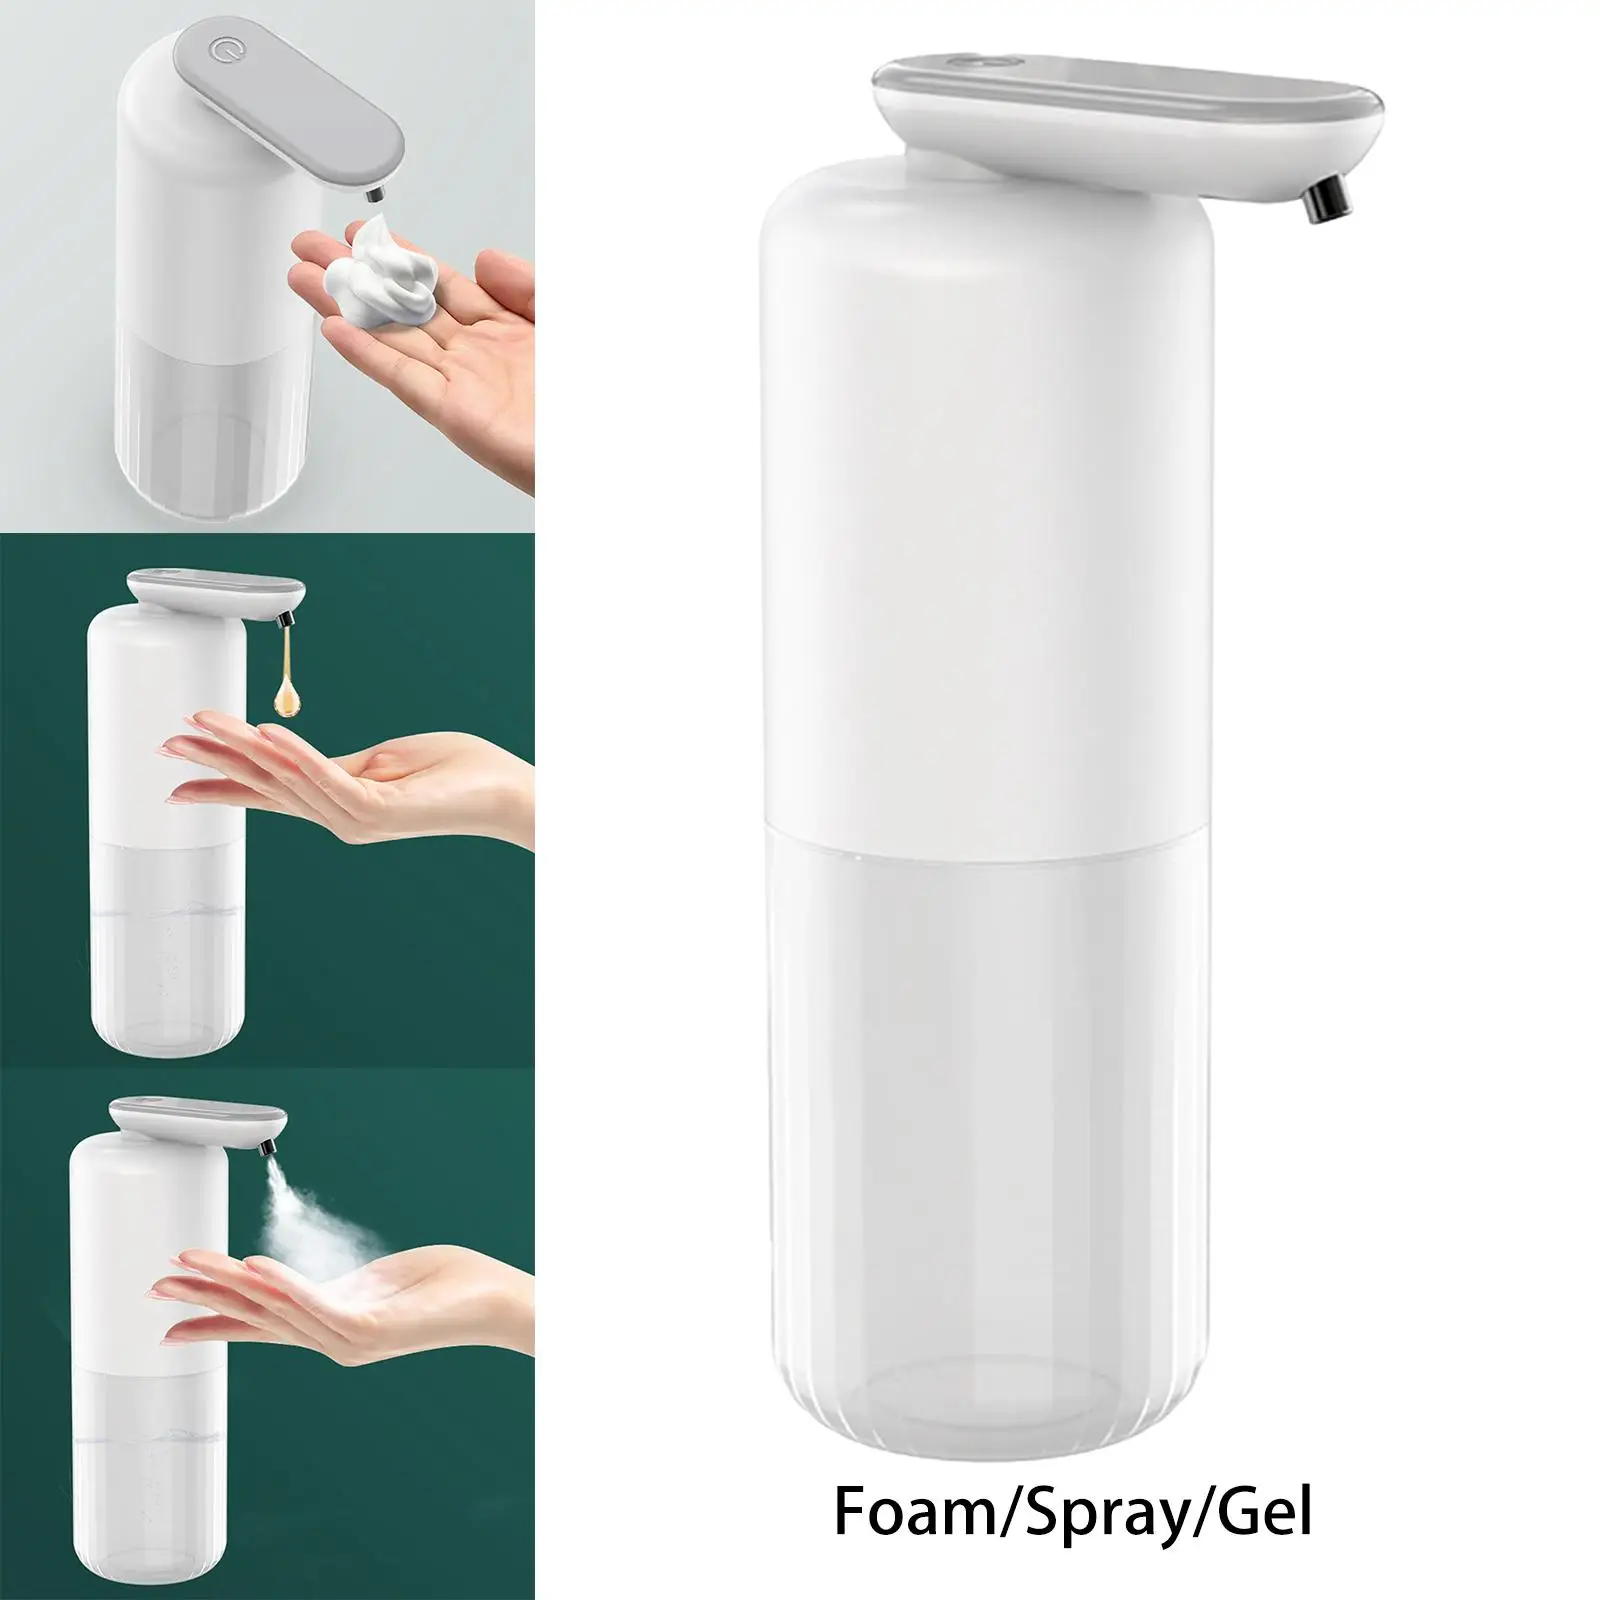 Touchless Automatic Soap Dispenser IPX4 Waterproof USB Rechargeable 350ml Electric for Restaurant Bathroom Dish Kitchen